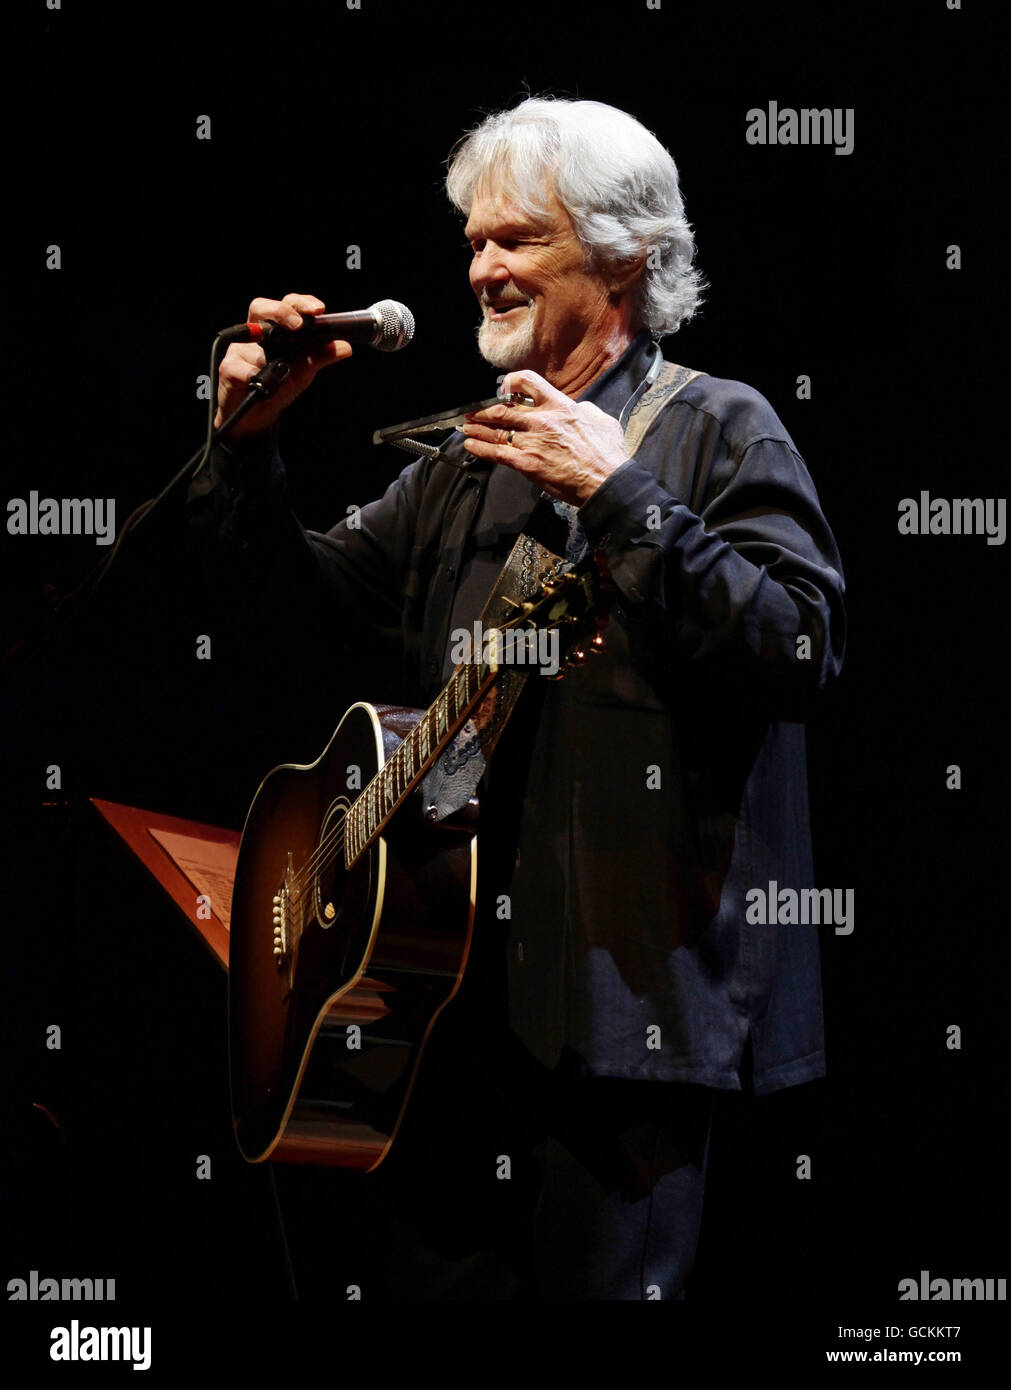 Actor and singer Kris Kristofferson performing at Cadogan Hall in central London. PRESS ASSOCIATION Photo. Picture date: Wednesday July 28, 2010. Photo credit should read: Yui Mok/PA Wire Stock Photo